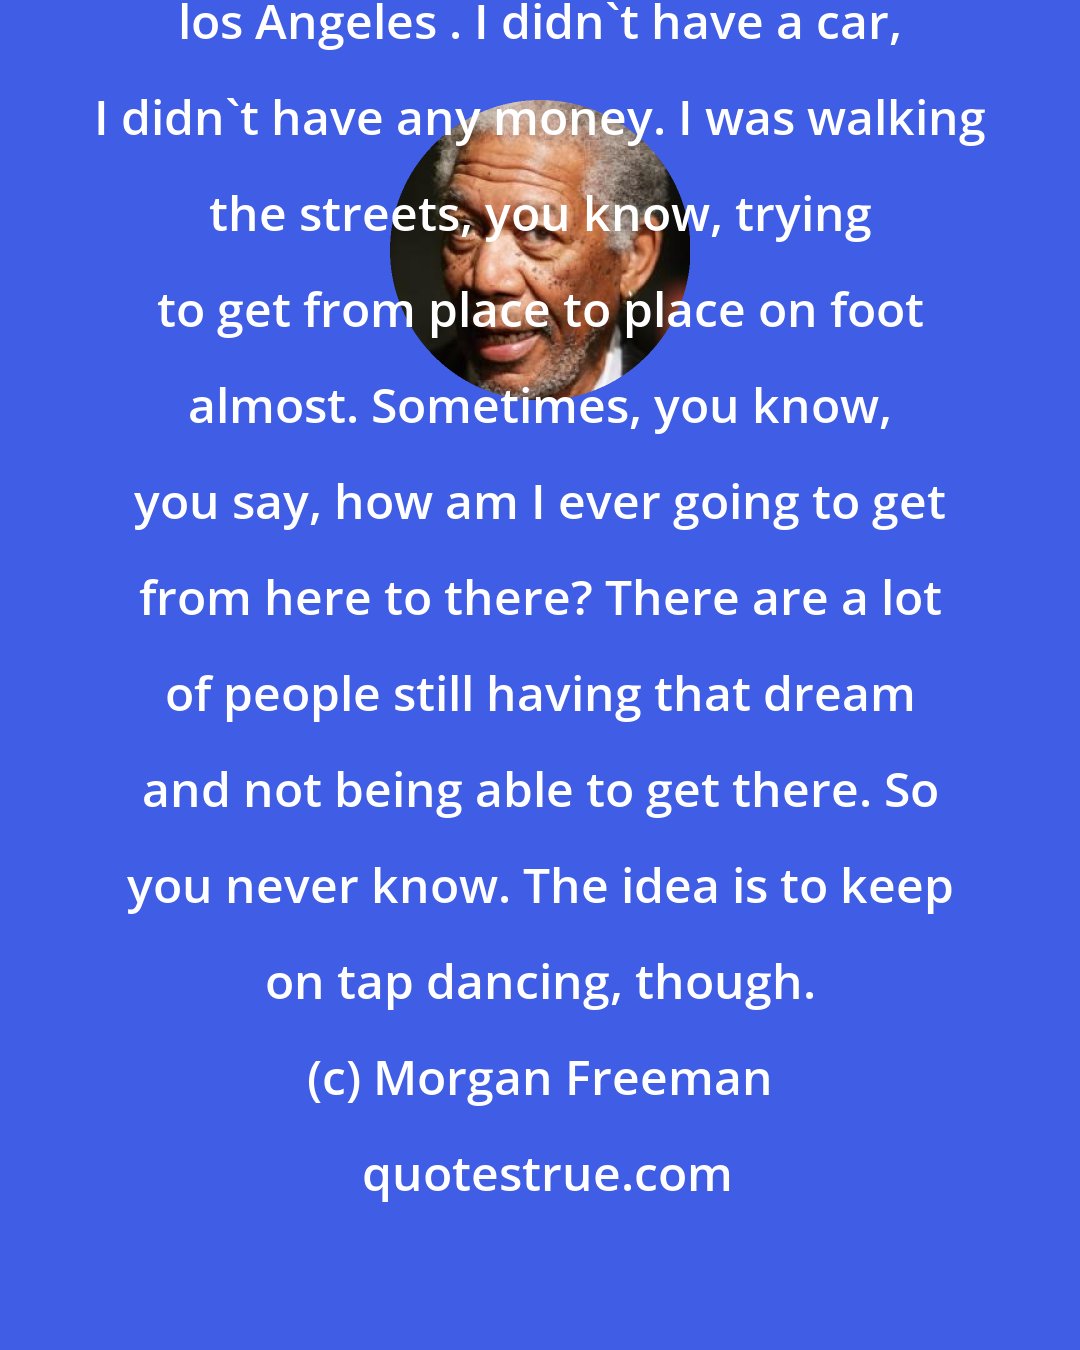 Morgan Freeman: I can remember when I first got to los Angeles . I didn't have a car, I didn't have any money. I was walking the streets, you know, trying to get from place to place on foot almost. Sometimes, you know, you say, how am I ever going to get from here to there? There are a lot of people still having that dream and not being able to get there. So you never know. The idea is to keep on tap dancing, though.